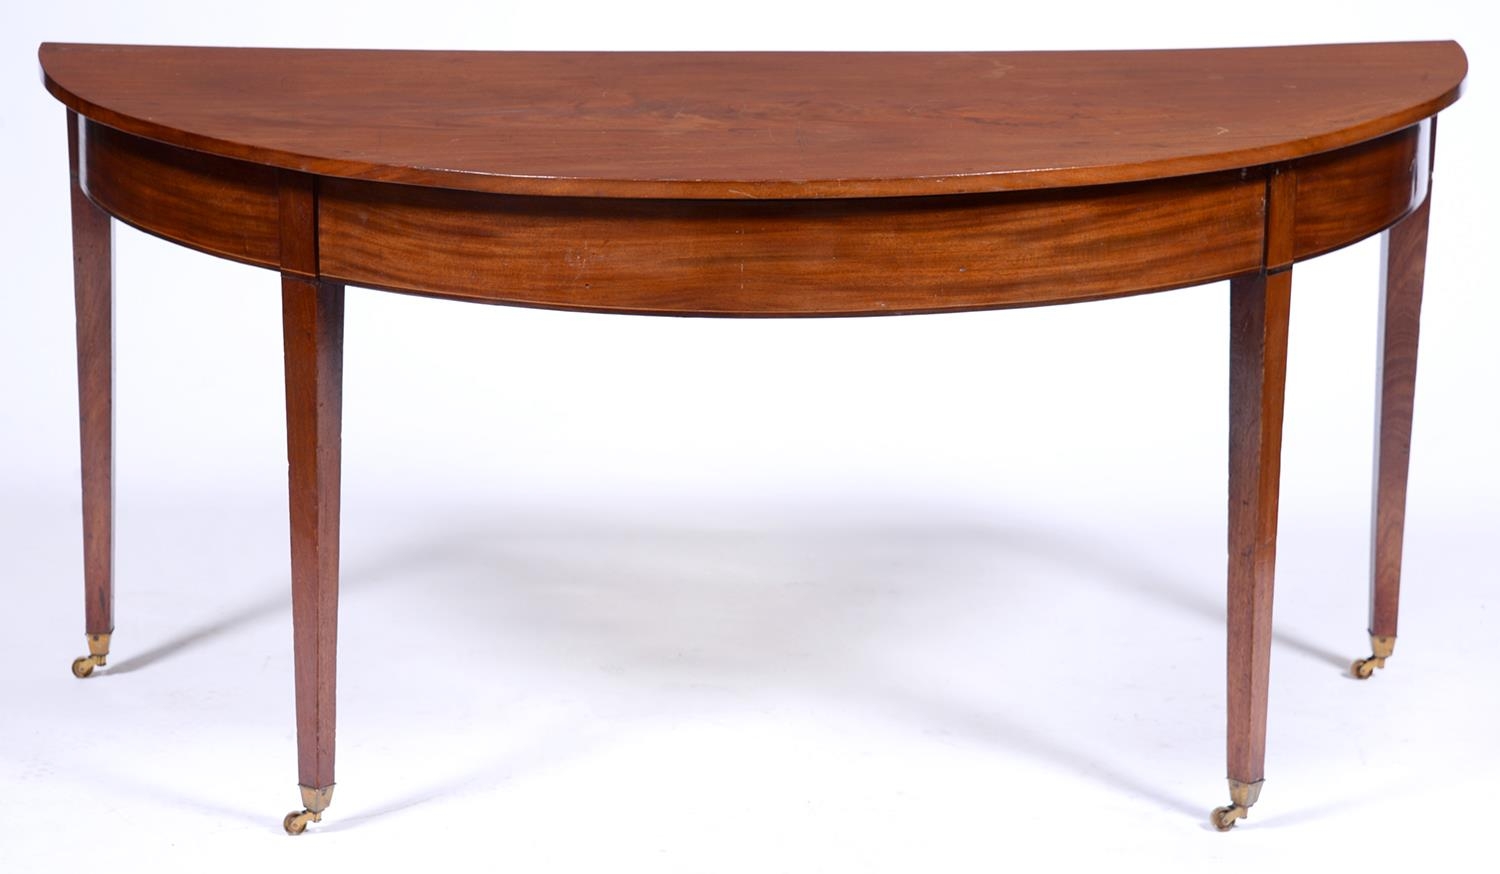 A George III mahogany side table, originally one end of a dining table, with flame figured top, on